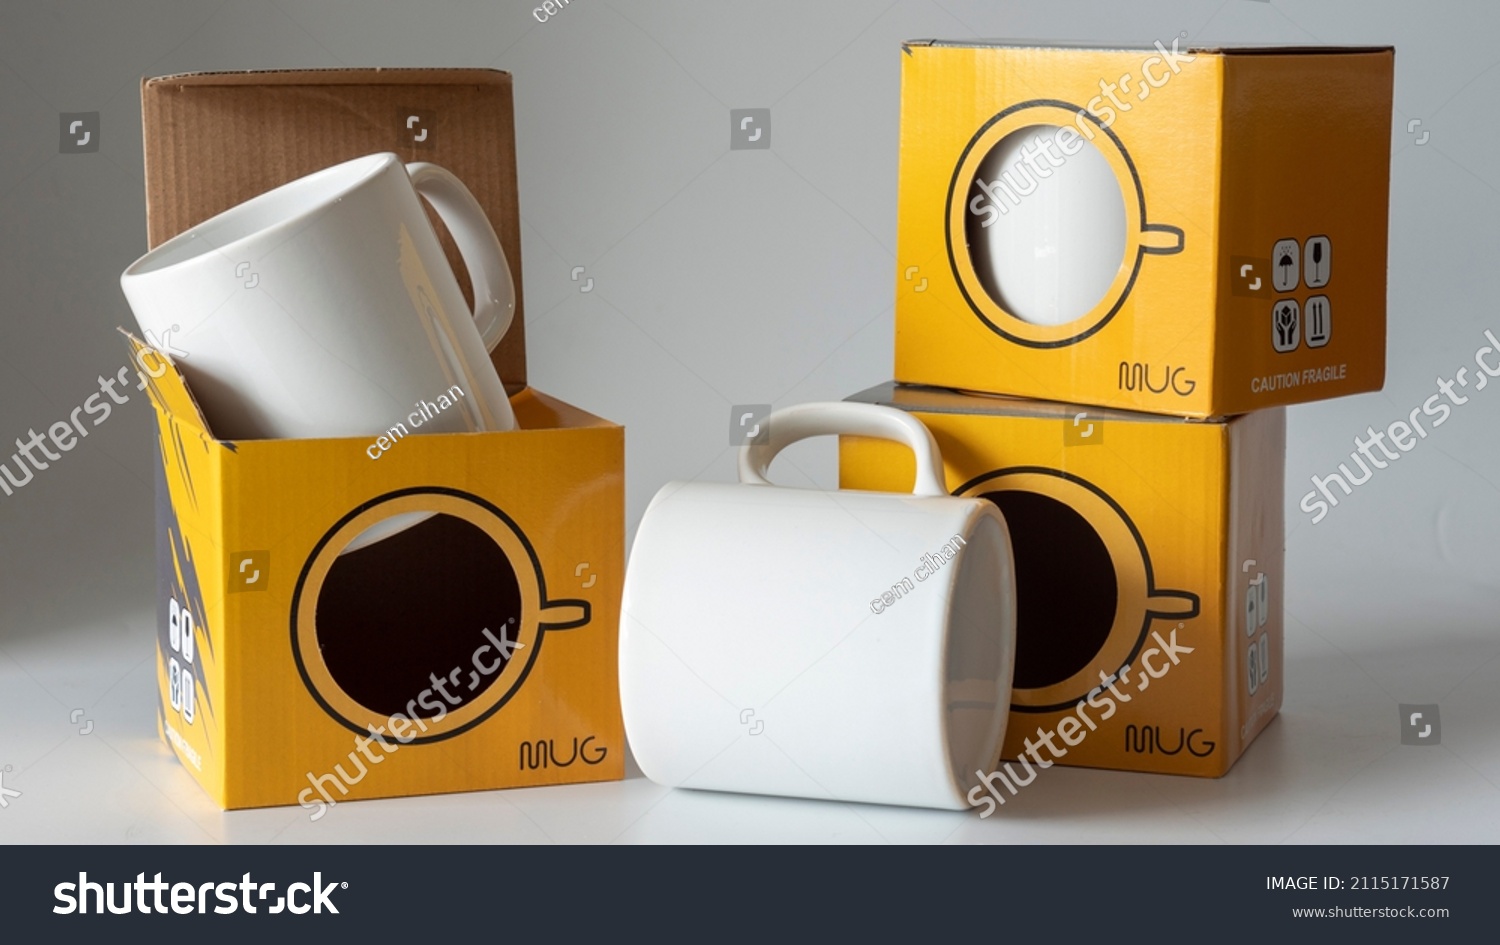 Mug cup and its storage container. One is inside, one is outside, and the other is on the box. Ready to ship mug and shipping box. It is suitable for the use of mug printing and mug sales companies. #2115171587